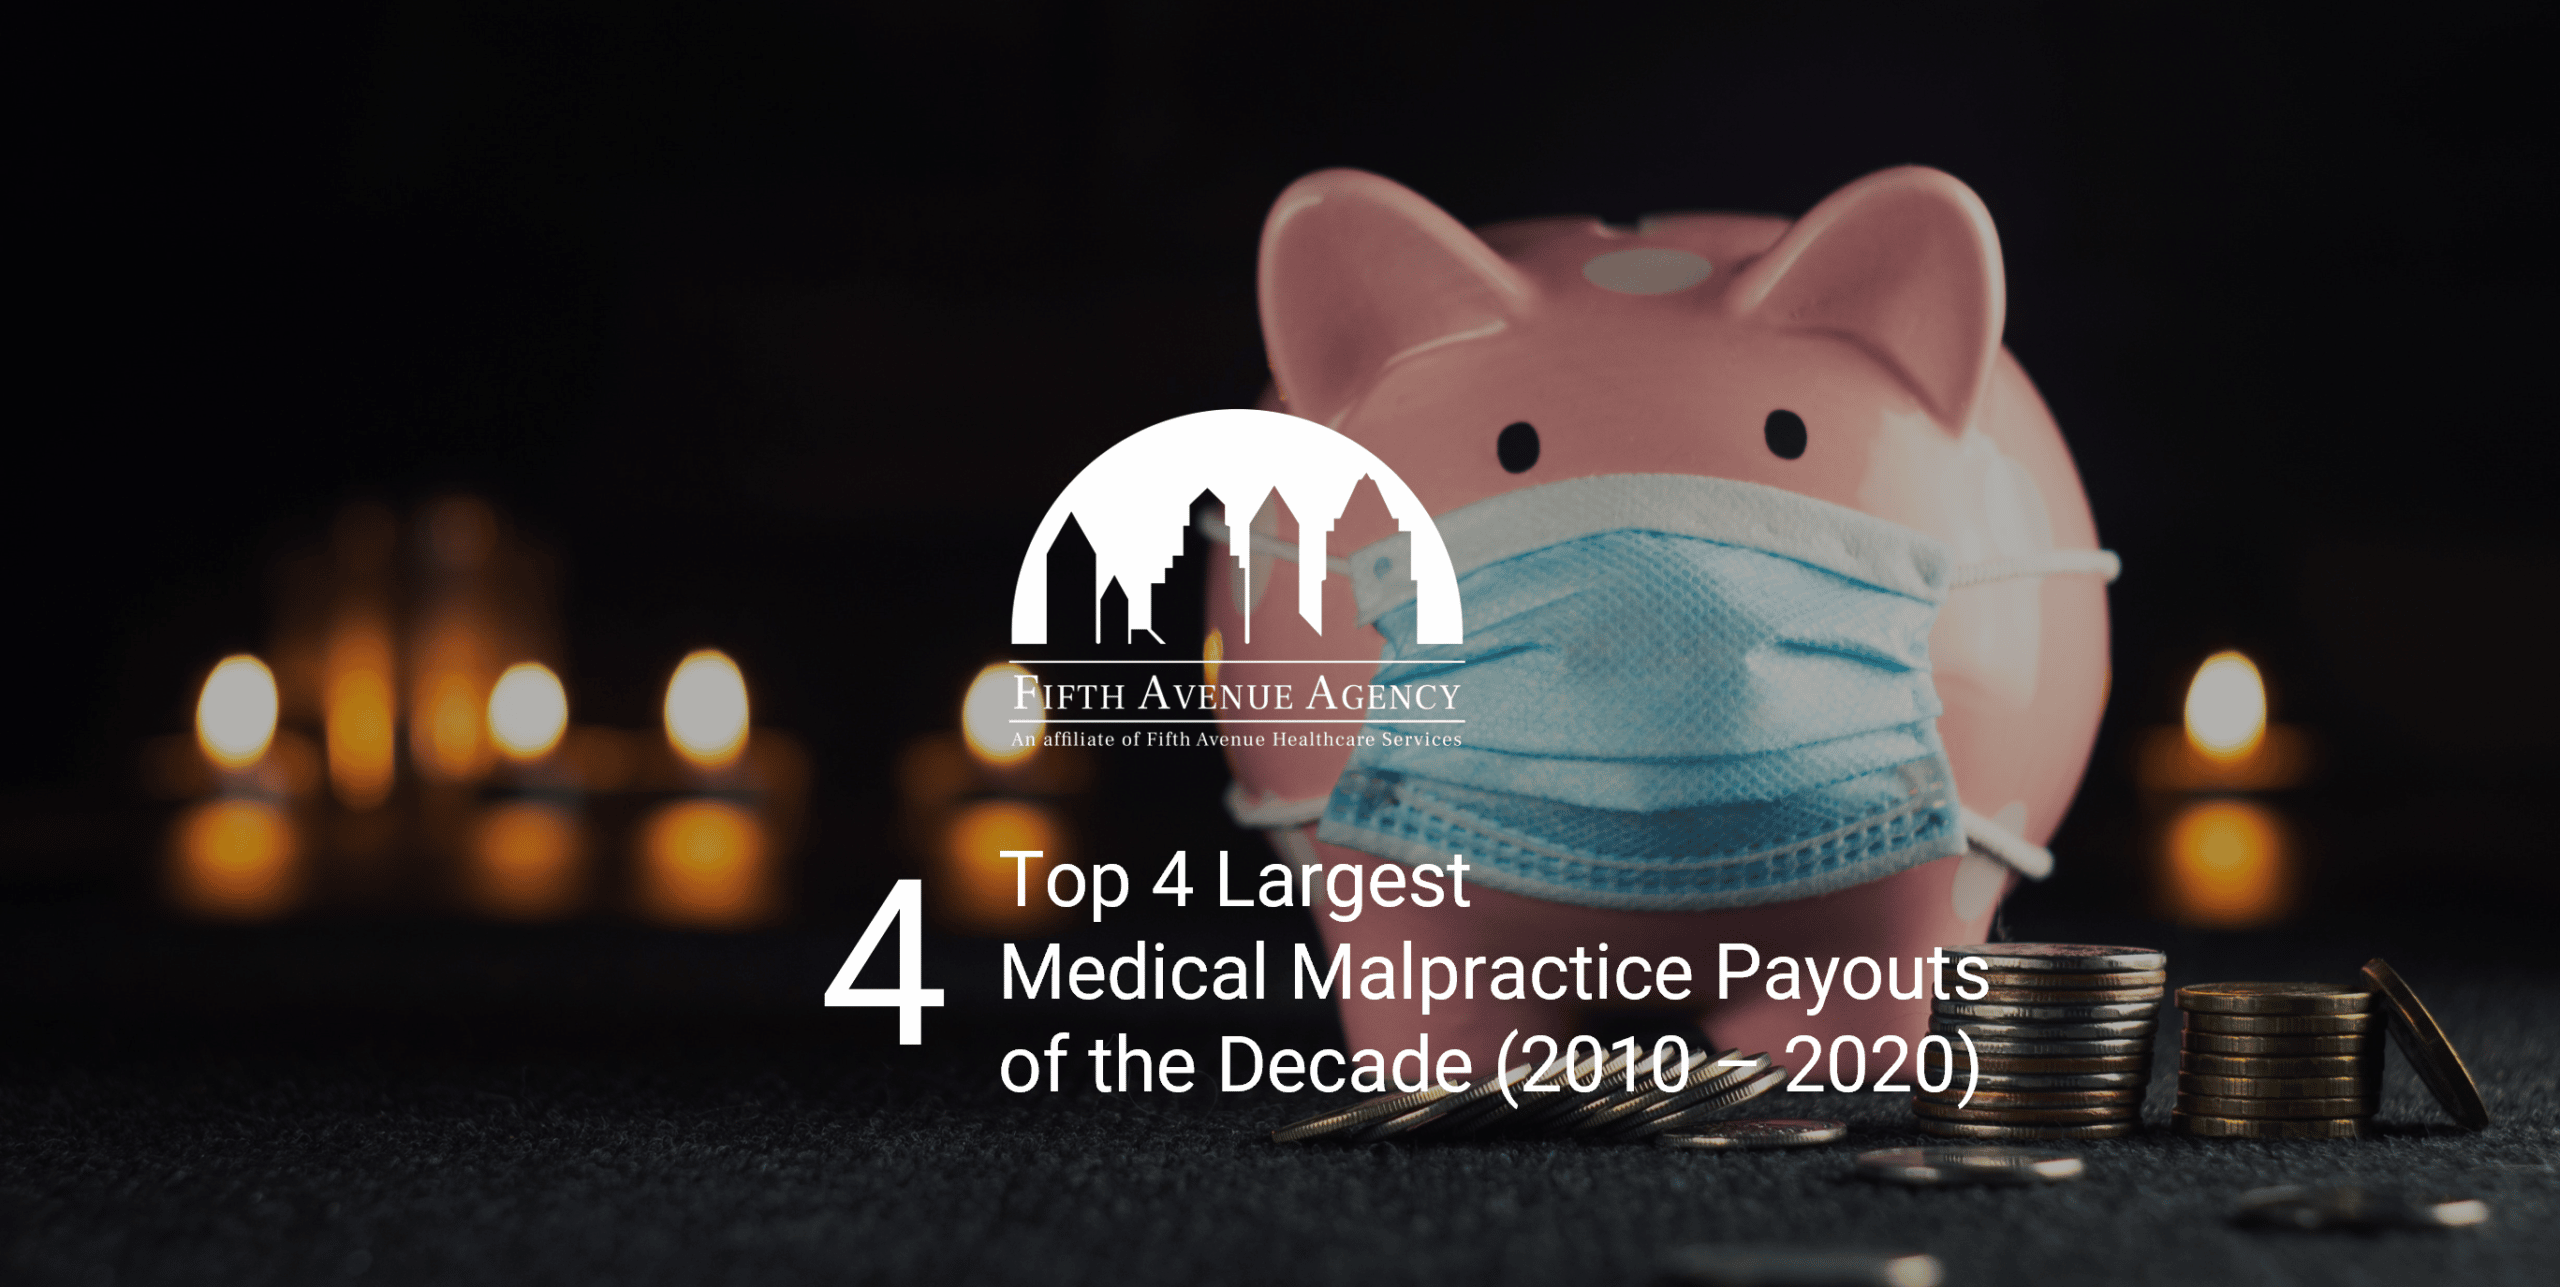 Medical Malpractice FifthAvenueAgency.com Top 4 Largest Medical Malpractice Payouts